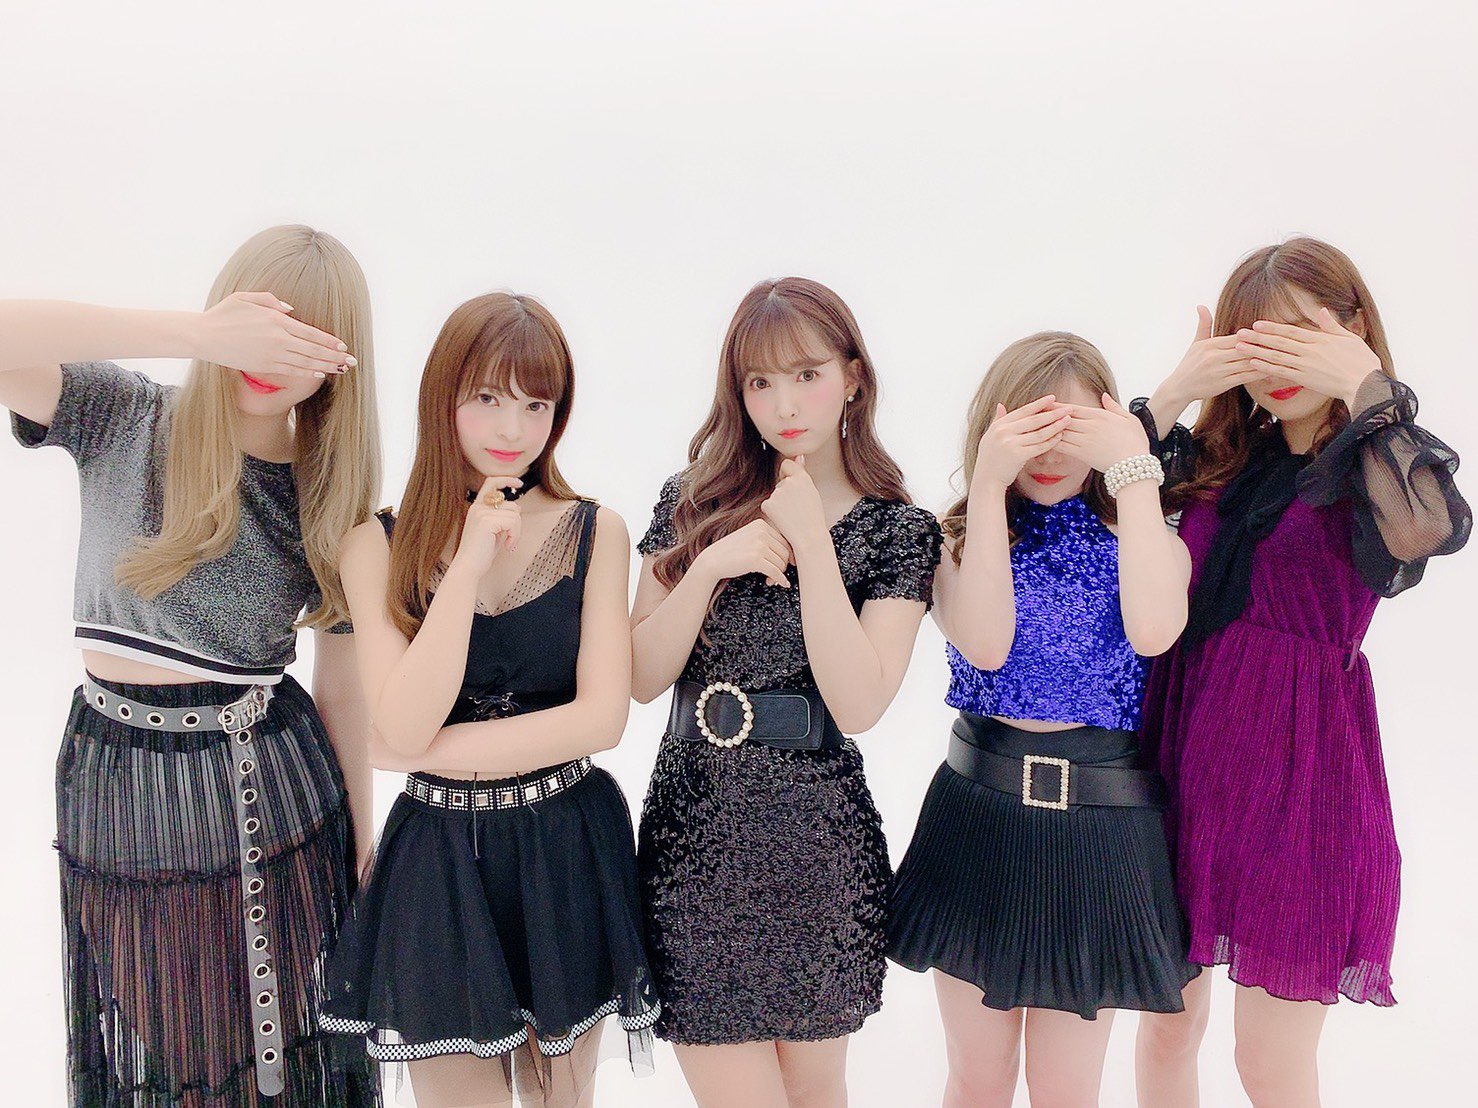 Posted by Honey Popcorn to twitter at 2019-05-24 16:13:14.